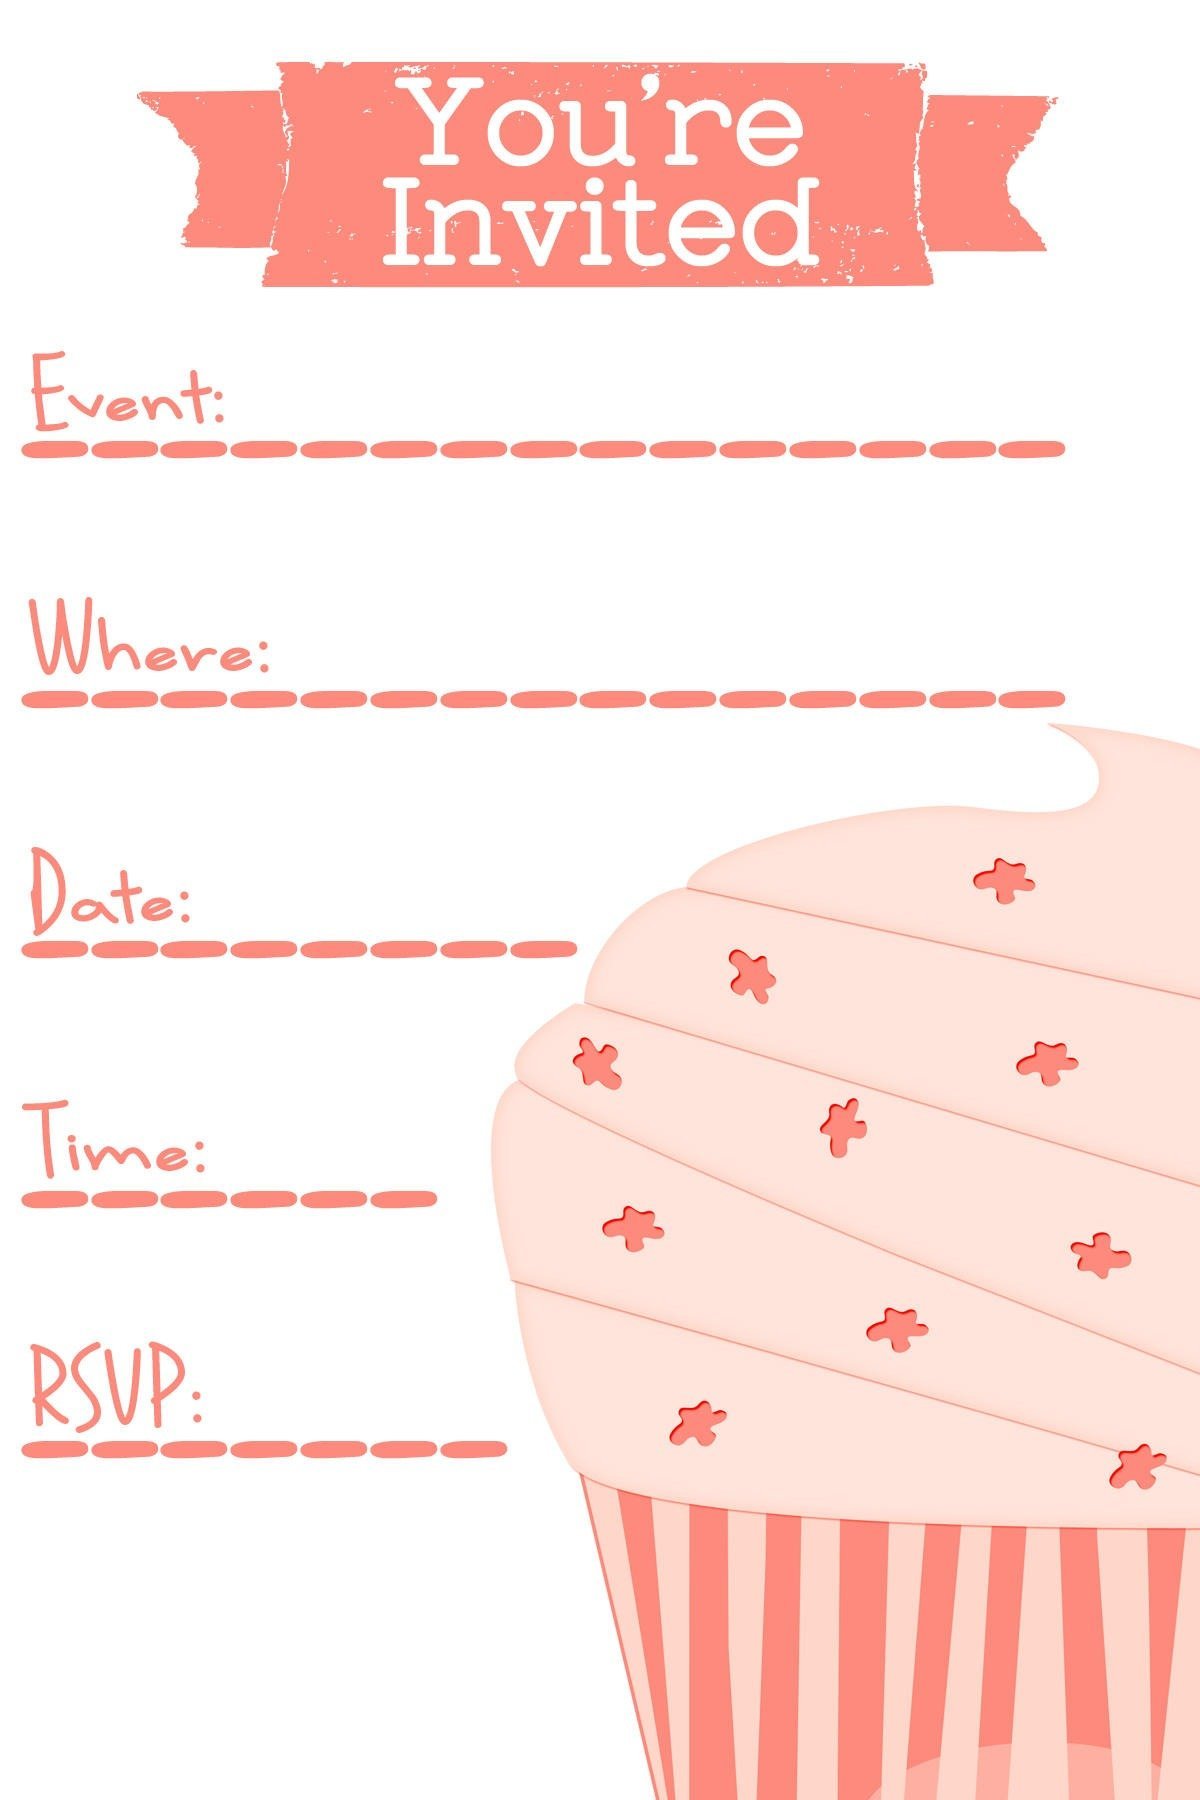 Free Template For Party Invitation Image â Colorful Party